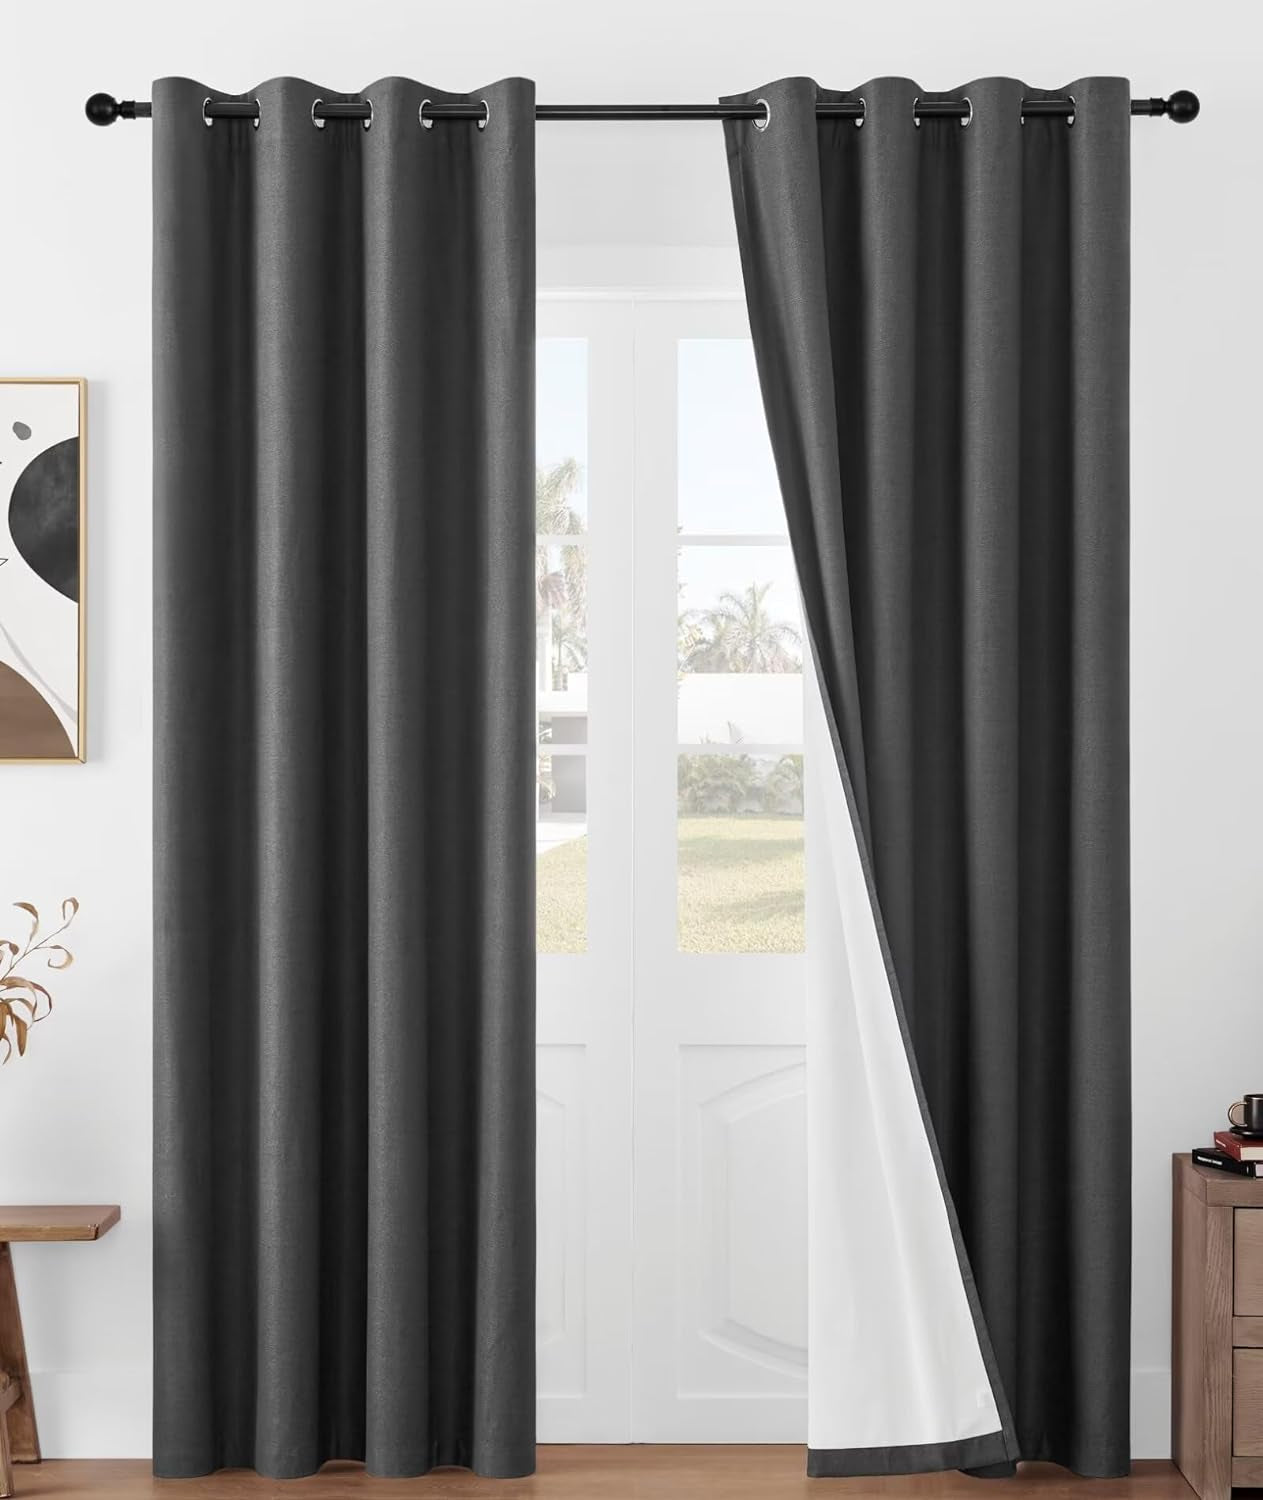 Joydeco 100% Blackout Curtains for Bedroom, Black Out Curtains 90 Inch Long, Ivory White Curtains for Living Room Window Thermal Insulated Drapes(W52 X L90 Inch, Ivory)  Joydeco 100 Blackout | Dark Grey 52W X 72L Inch X 2 Panels 